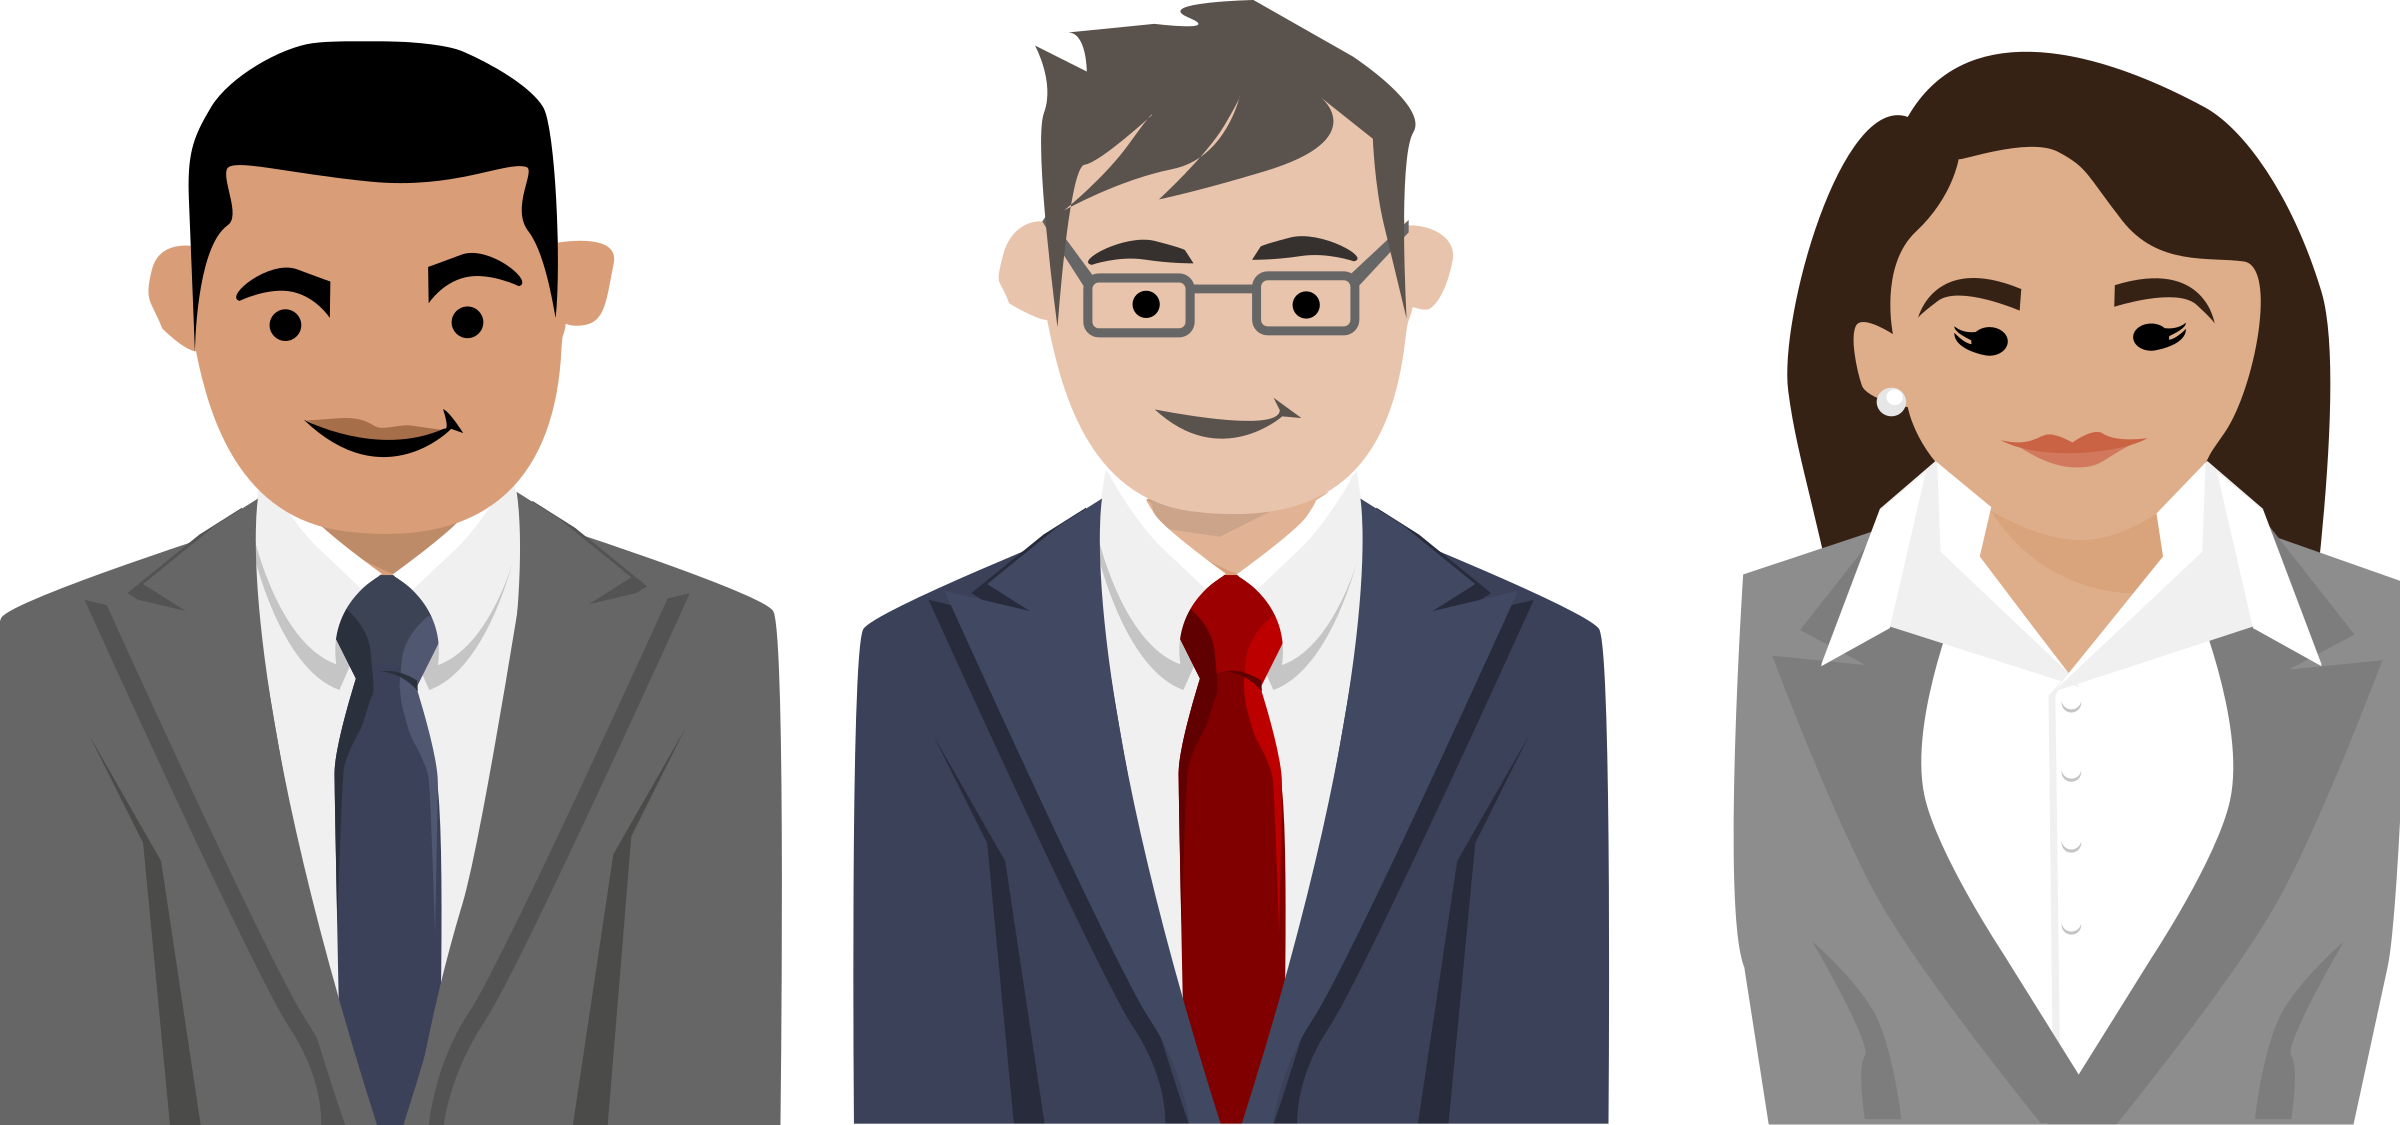 Business People Clipart Png